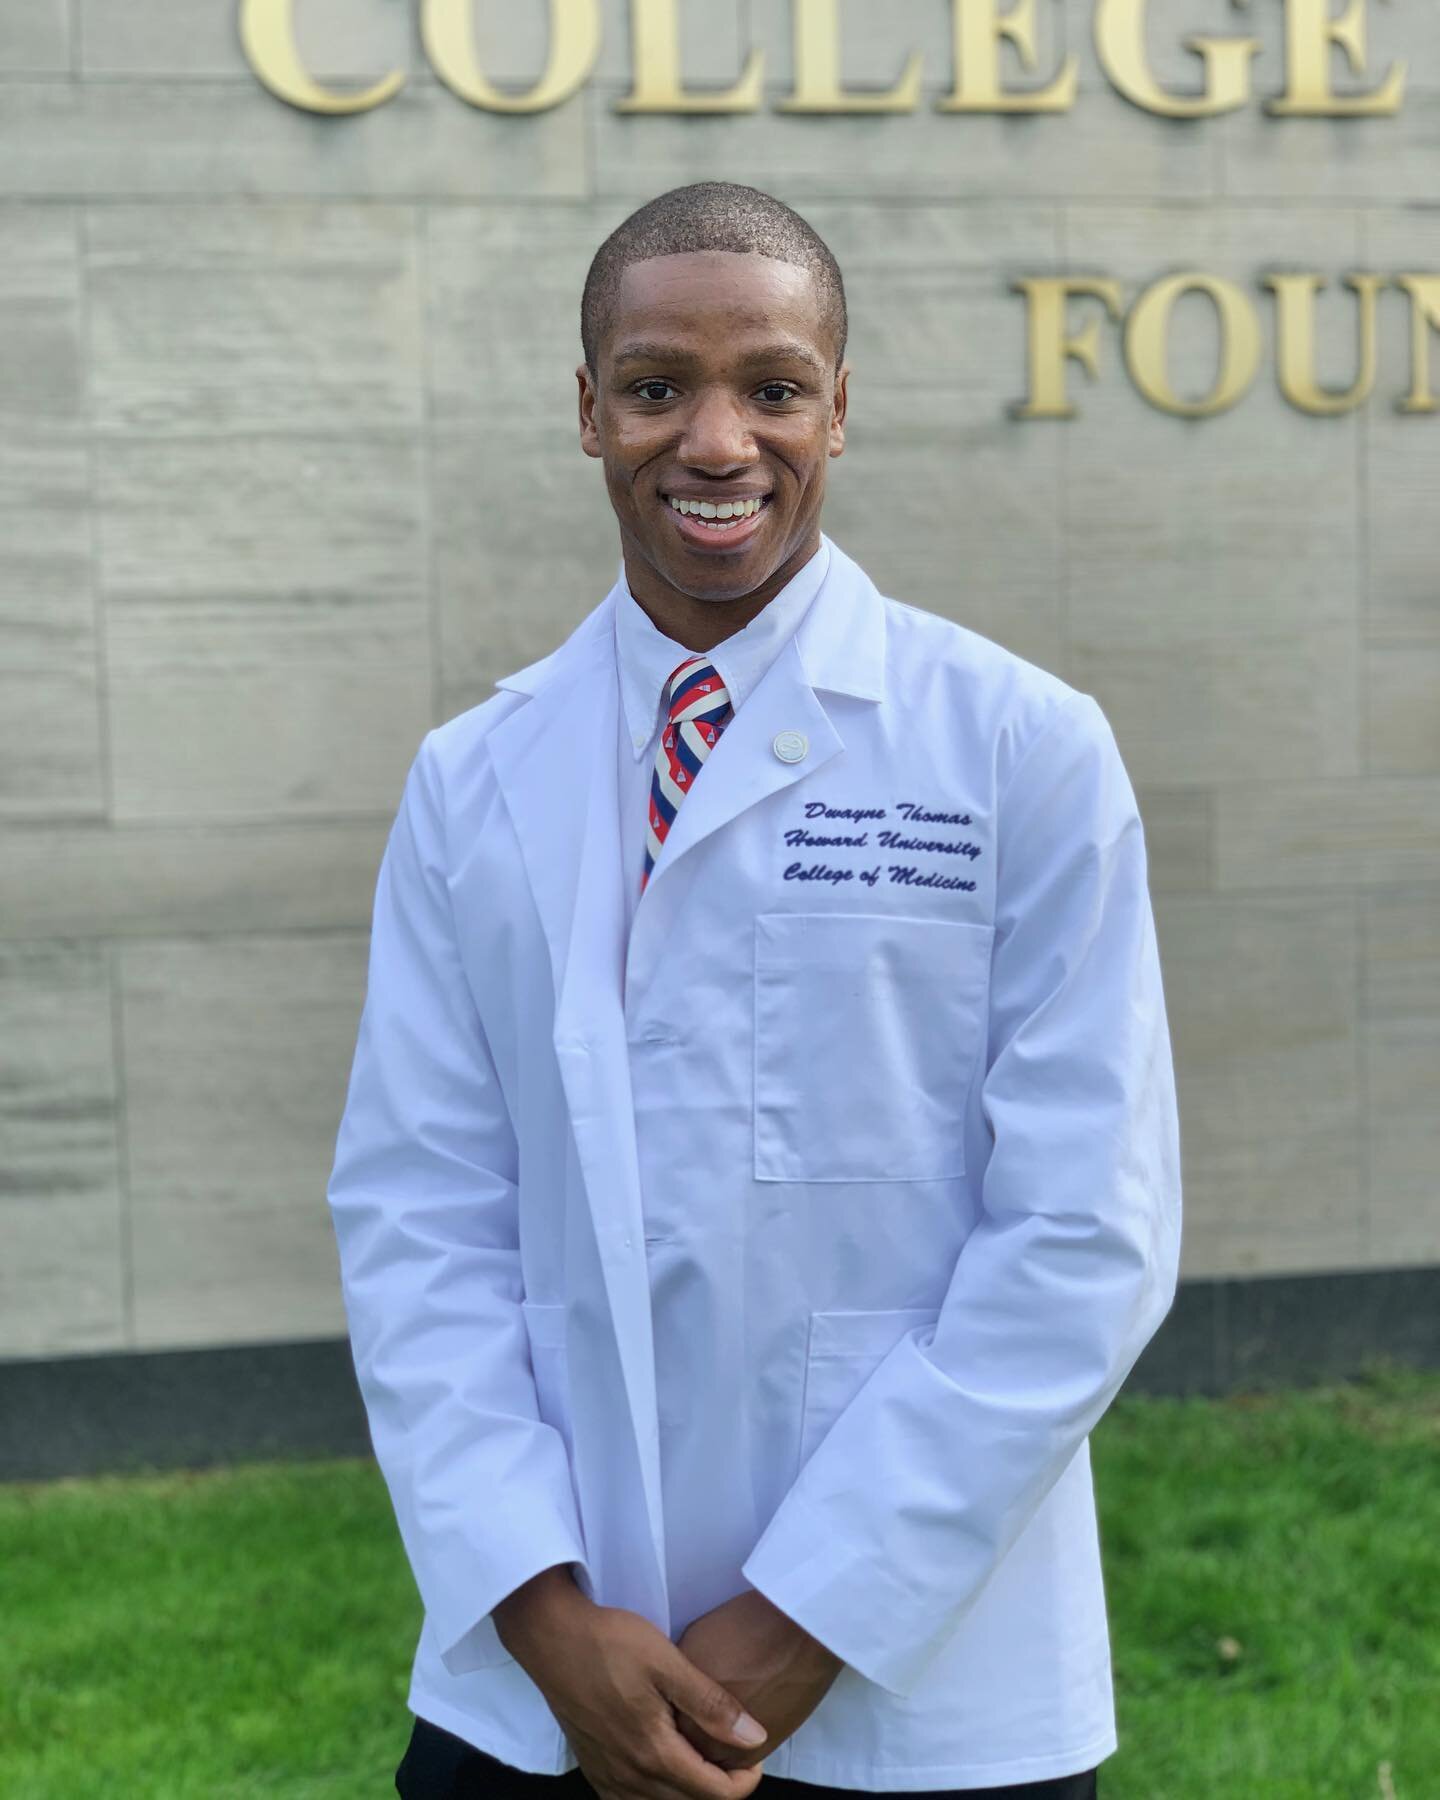 ✨ STUDENT SPOTLIGHT ✨

Name: Dwayne Thomas - Vice President of Education

Hometown: Baltimore, MD

College/Education: Loyola University Maryland

Specialty of Interest: Surgery/Surgical Oncology

Fun Fact: I coached ice hockey prior to coming to Howa